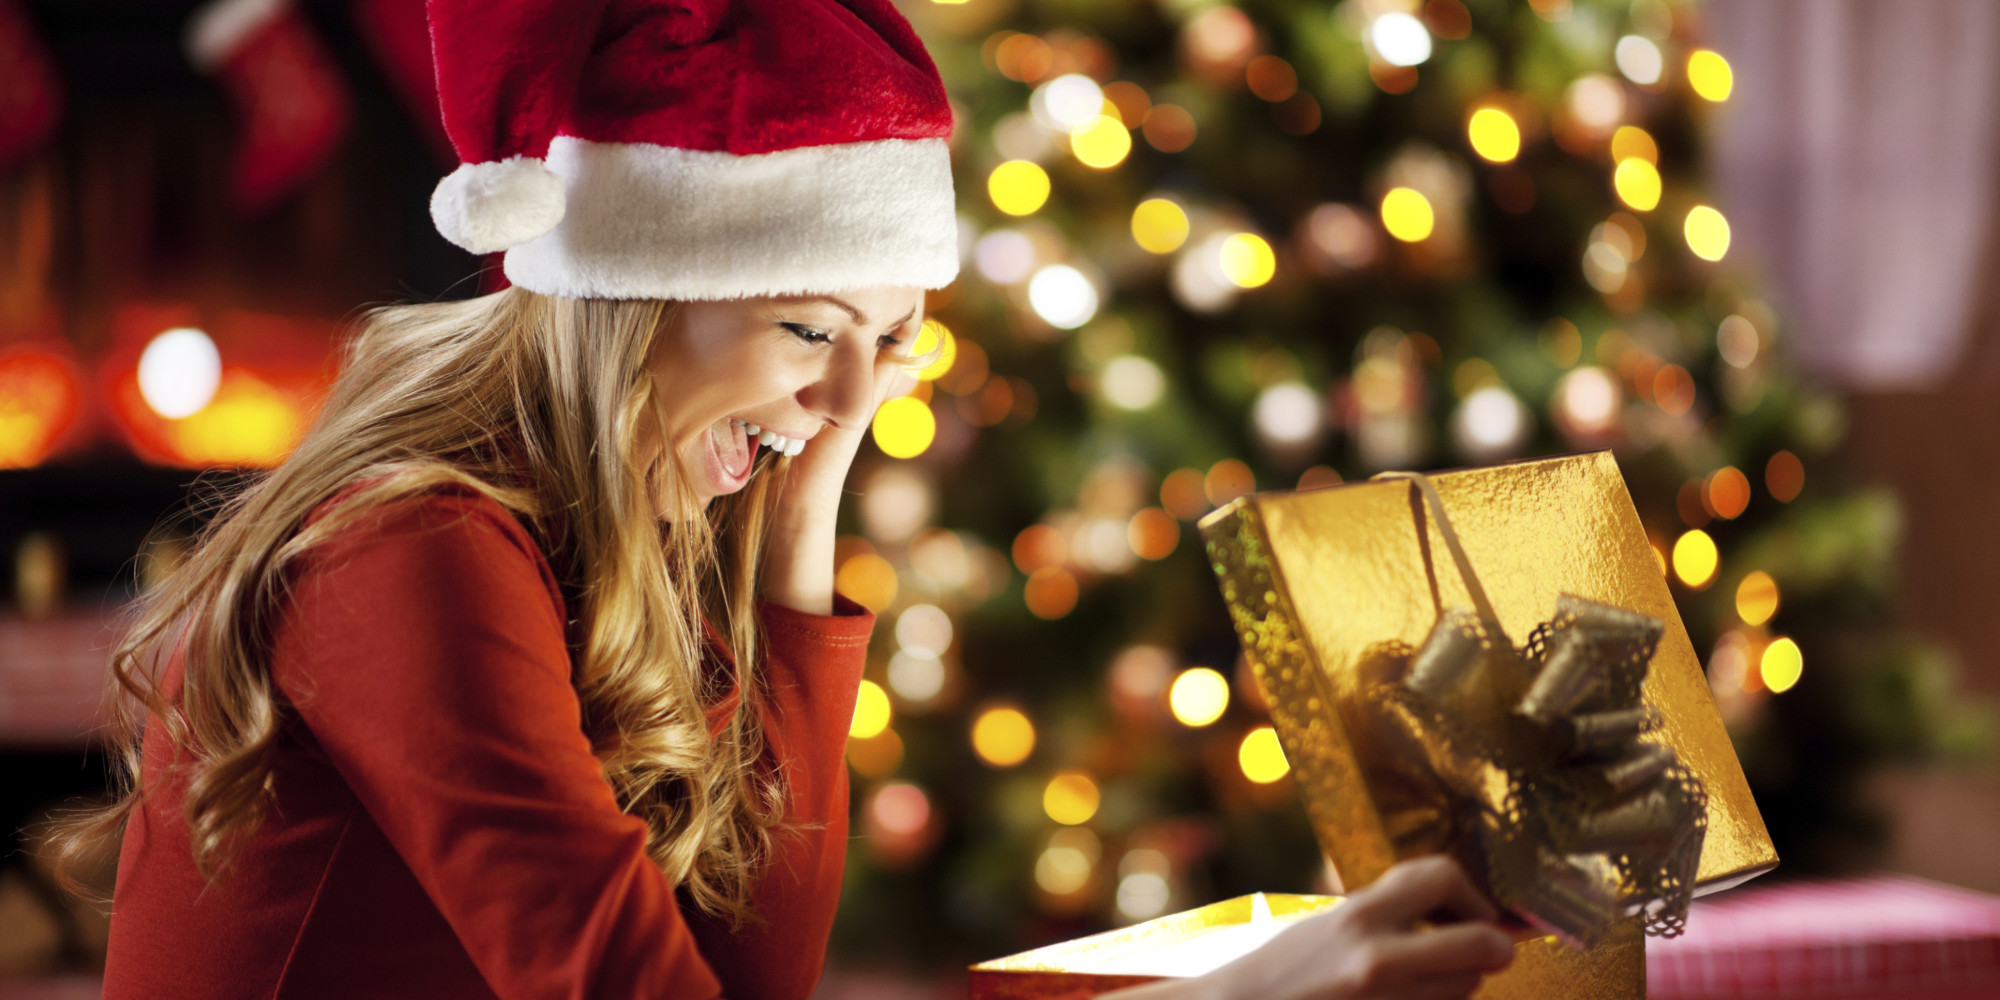 BEST THOUGHTFUL CHRISTMAS GIFTS IDEAS FOR YOUR NEAR AND DEAR ONES